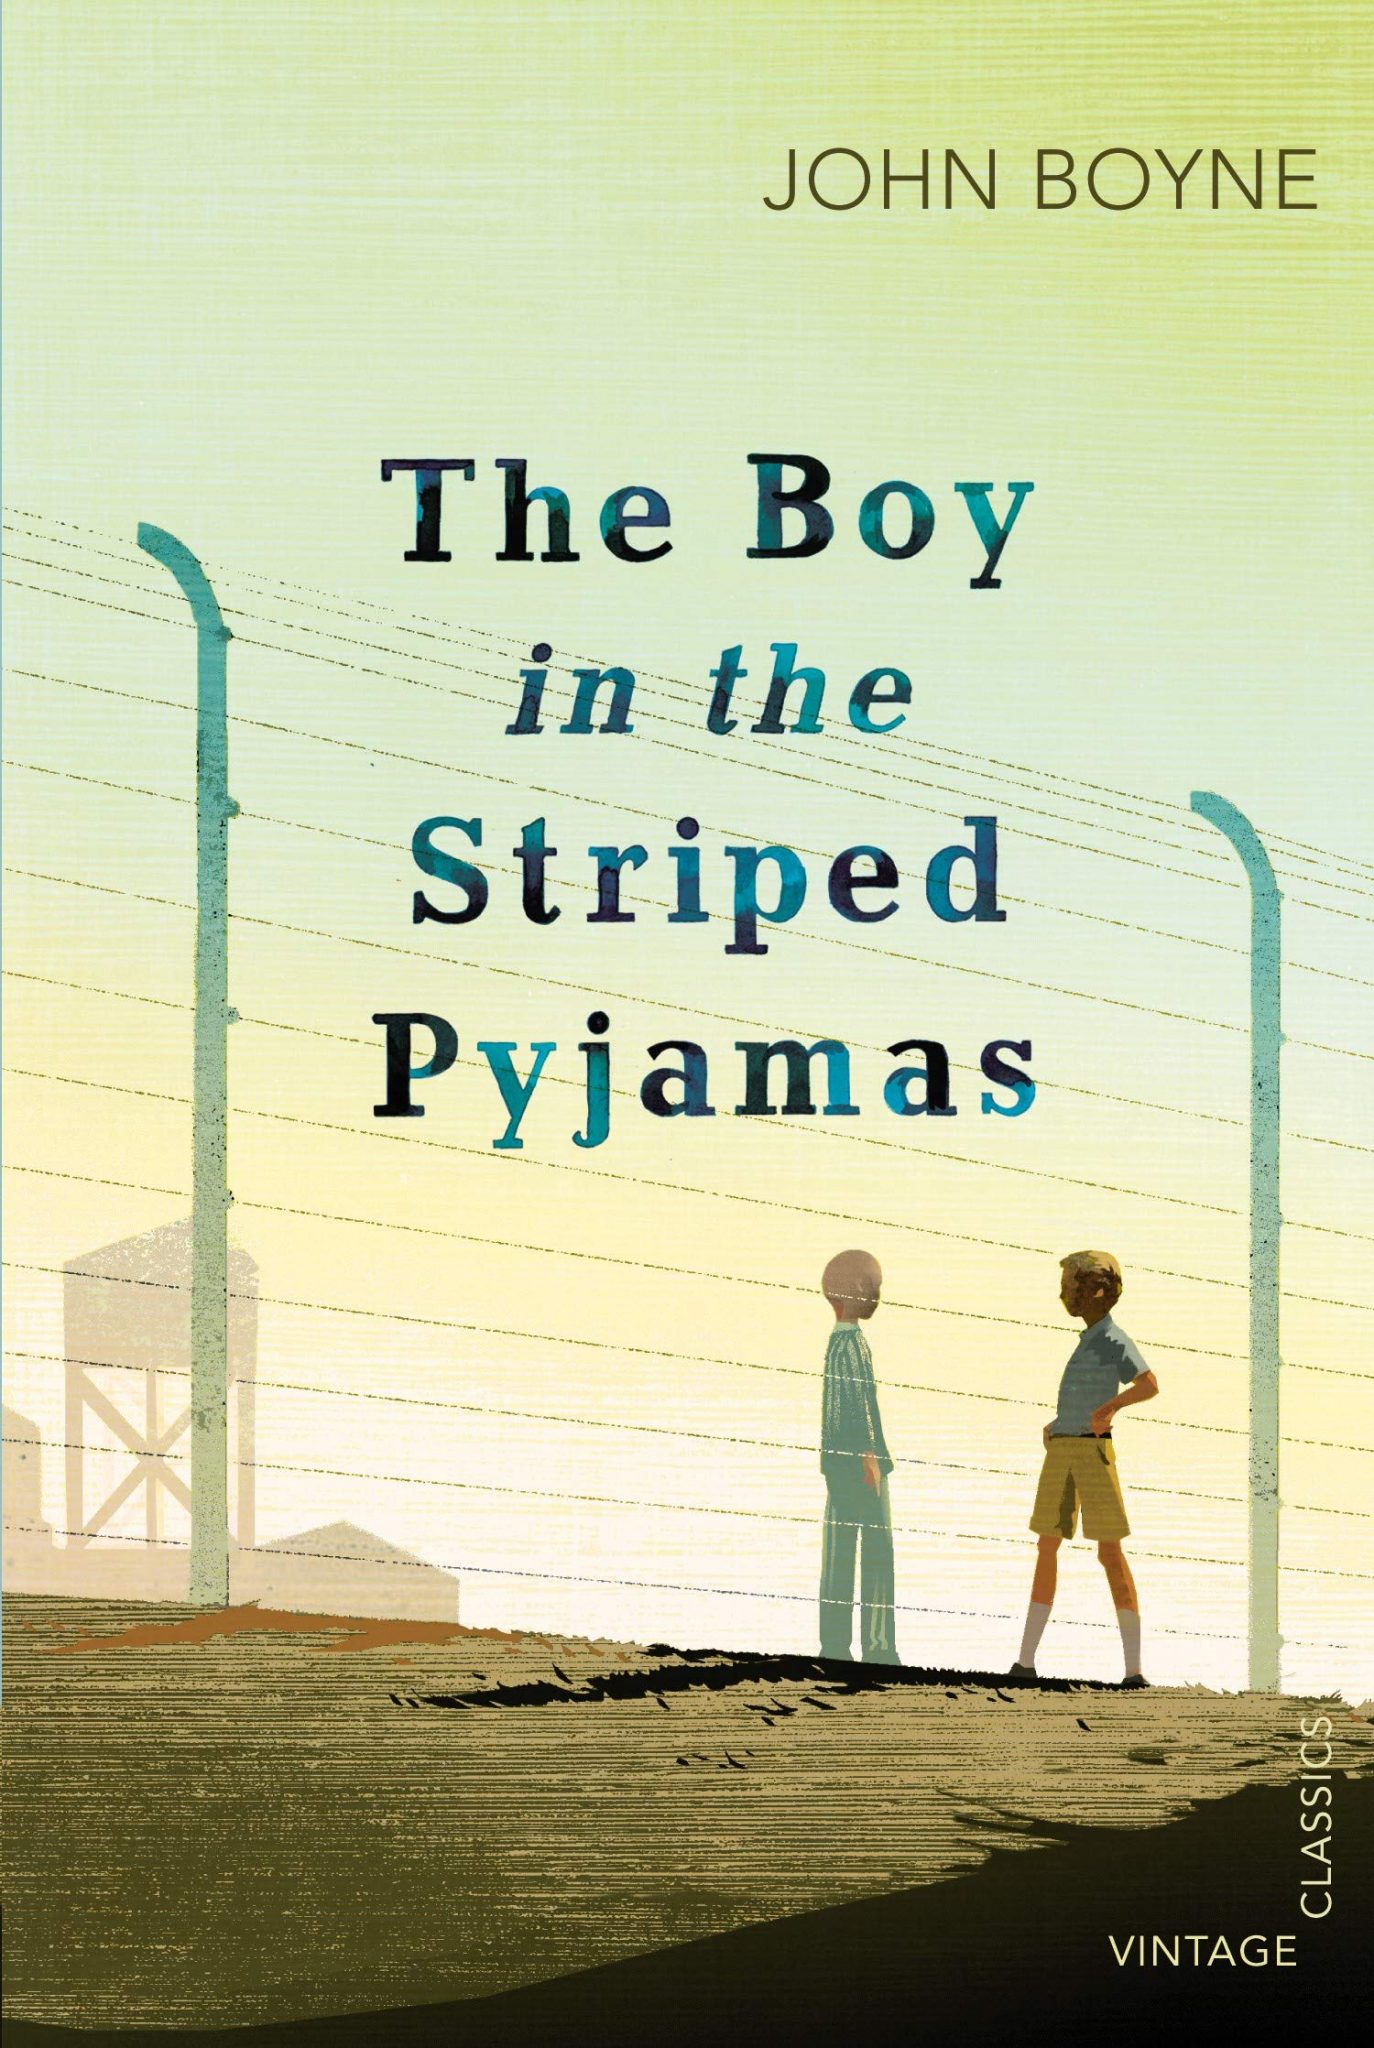 book review for the boy in the striped pajamas